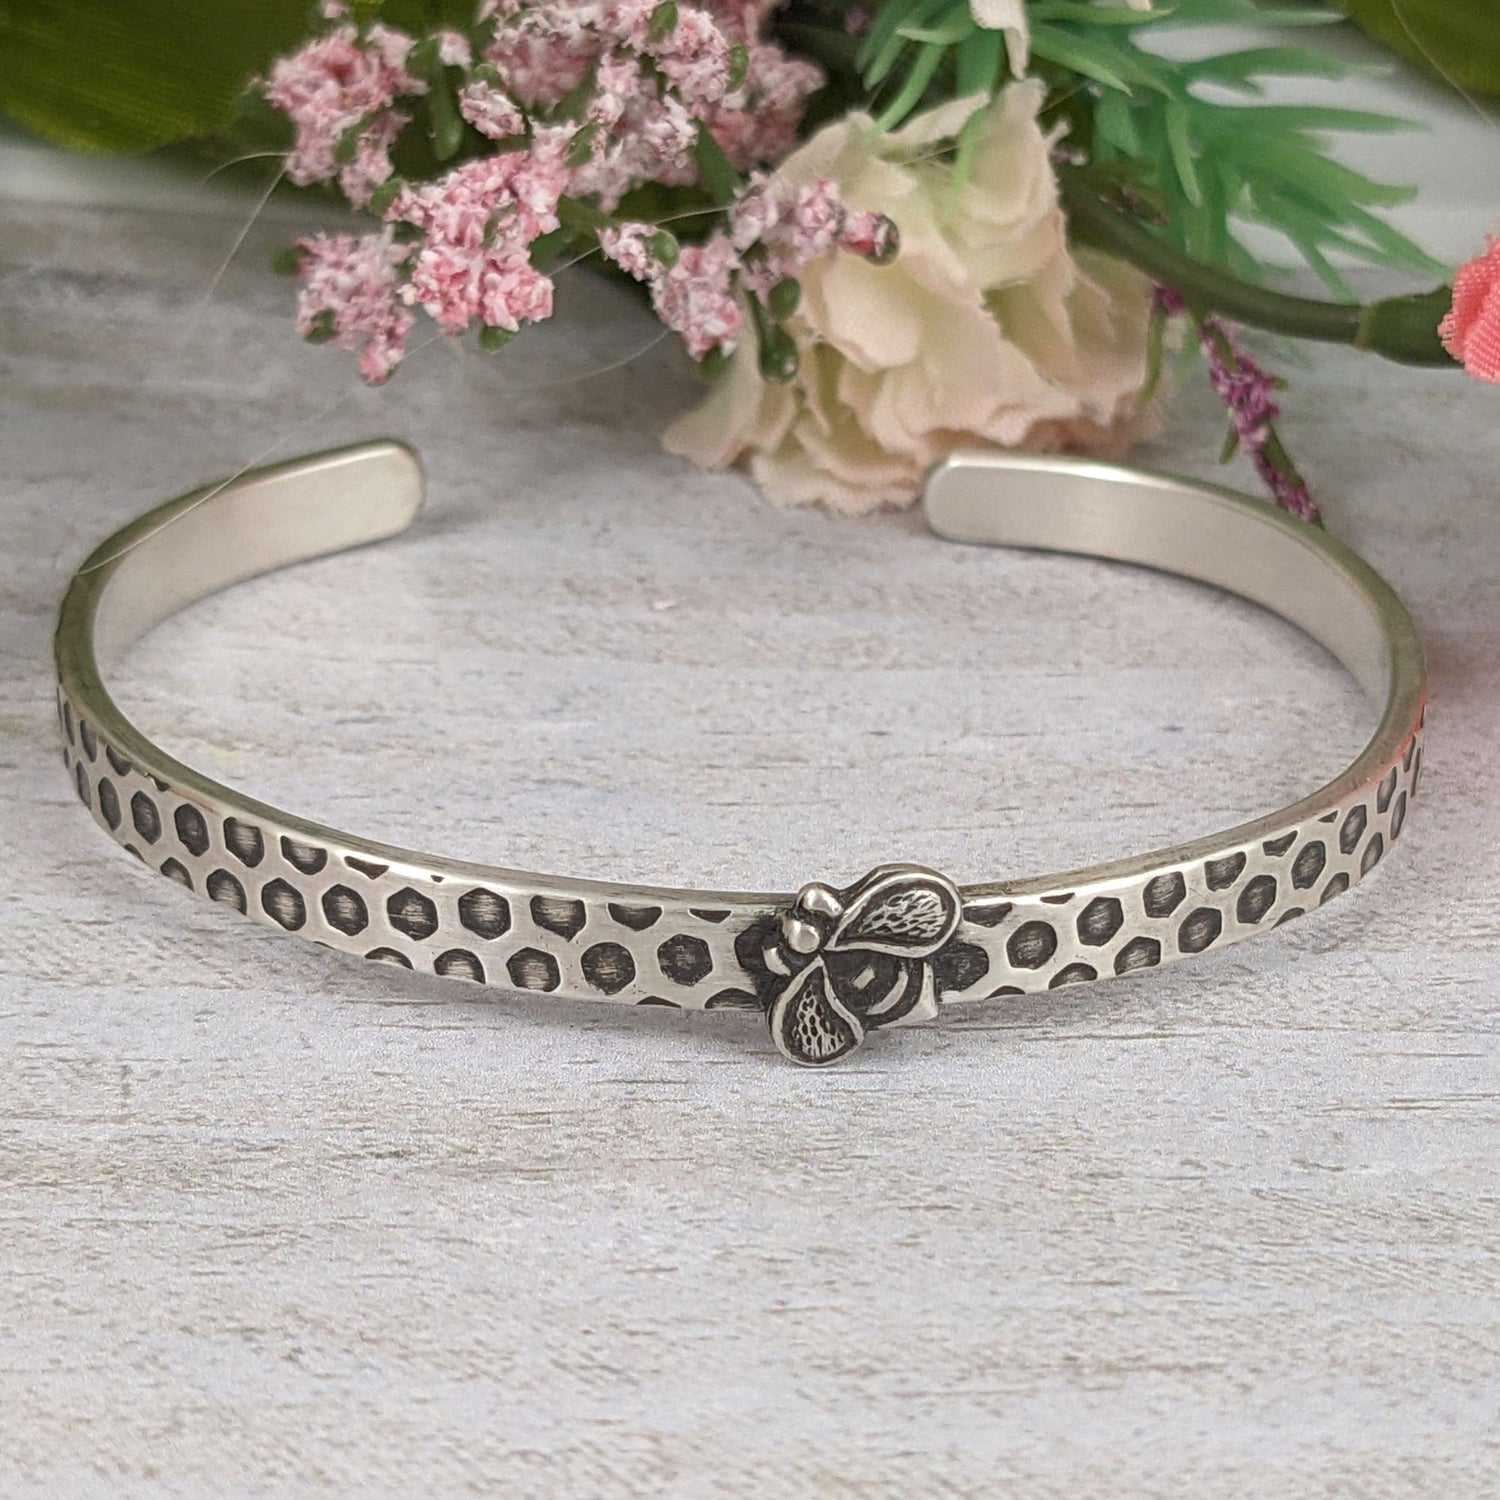 Narrow sterling silver cuff bracelet with a hexagon honeycomb pattern. A the center of the cuff there's a sterling silver honeybee. Staged with flowers in the background.